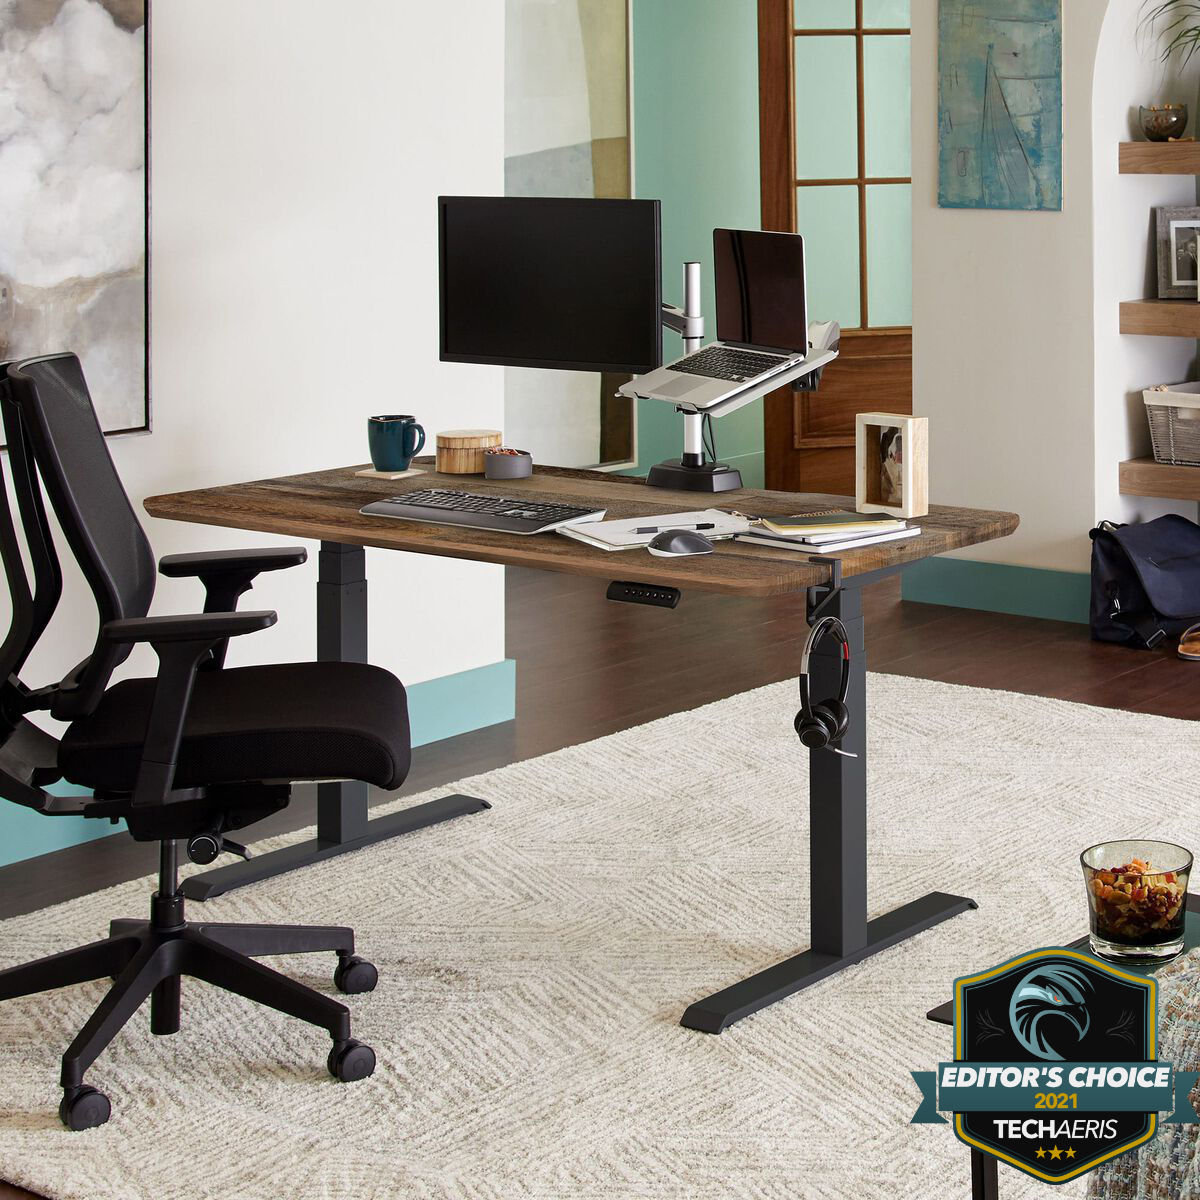 Working from home? Set up your ideal office space with these Vari products